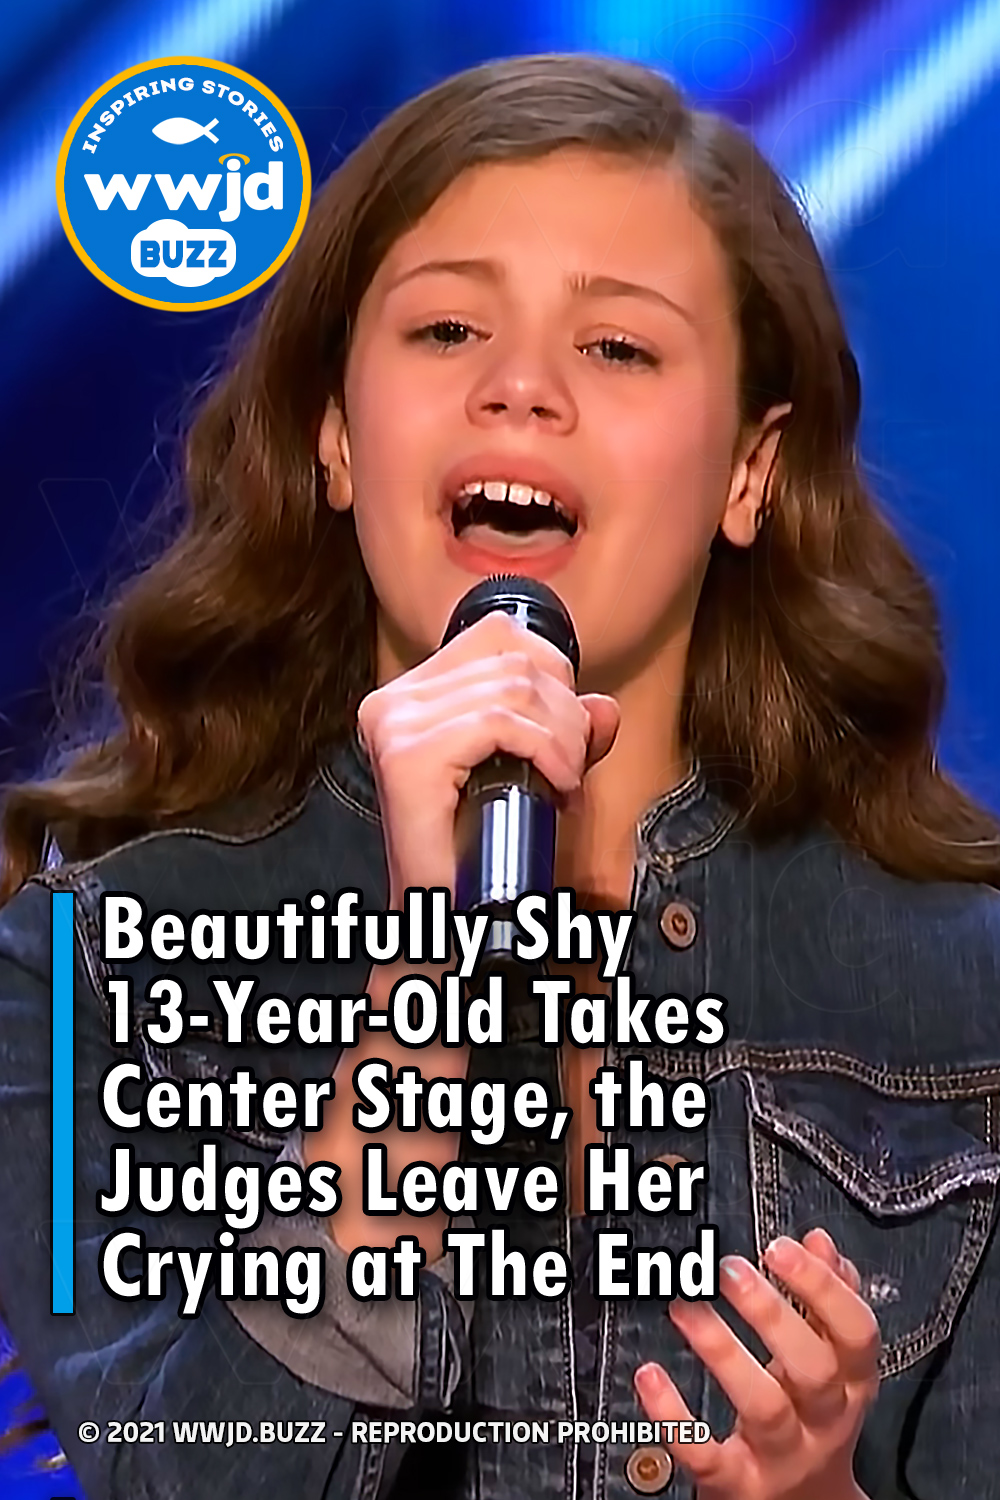 Beautifully Shy 13-Year-Old Takes Center Stage, the Judges Leave Her Crying at The End